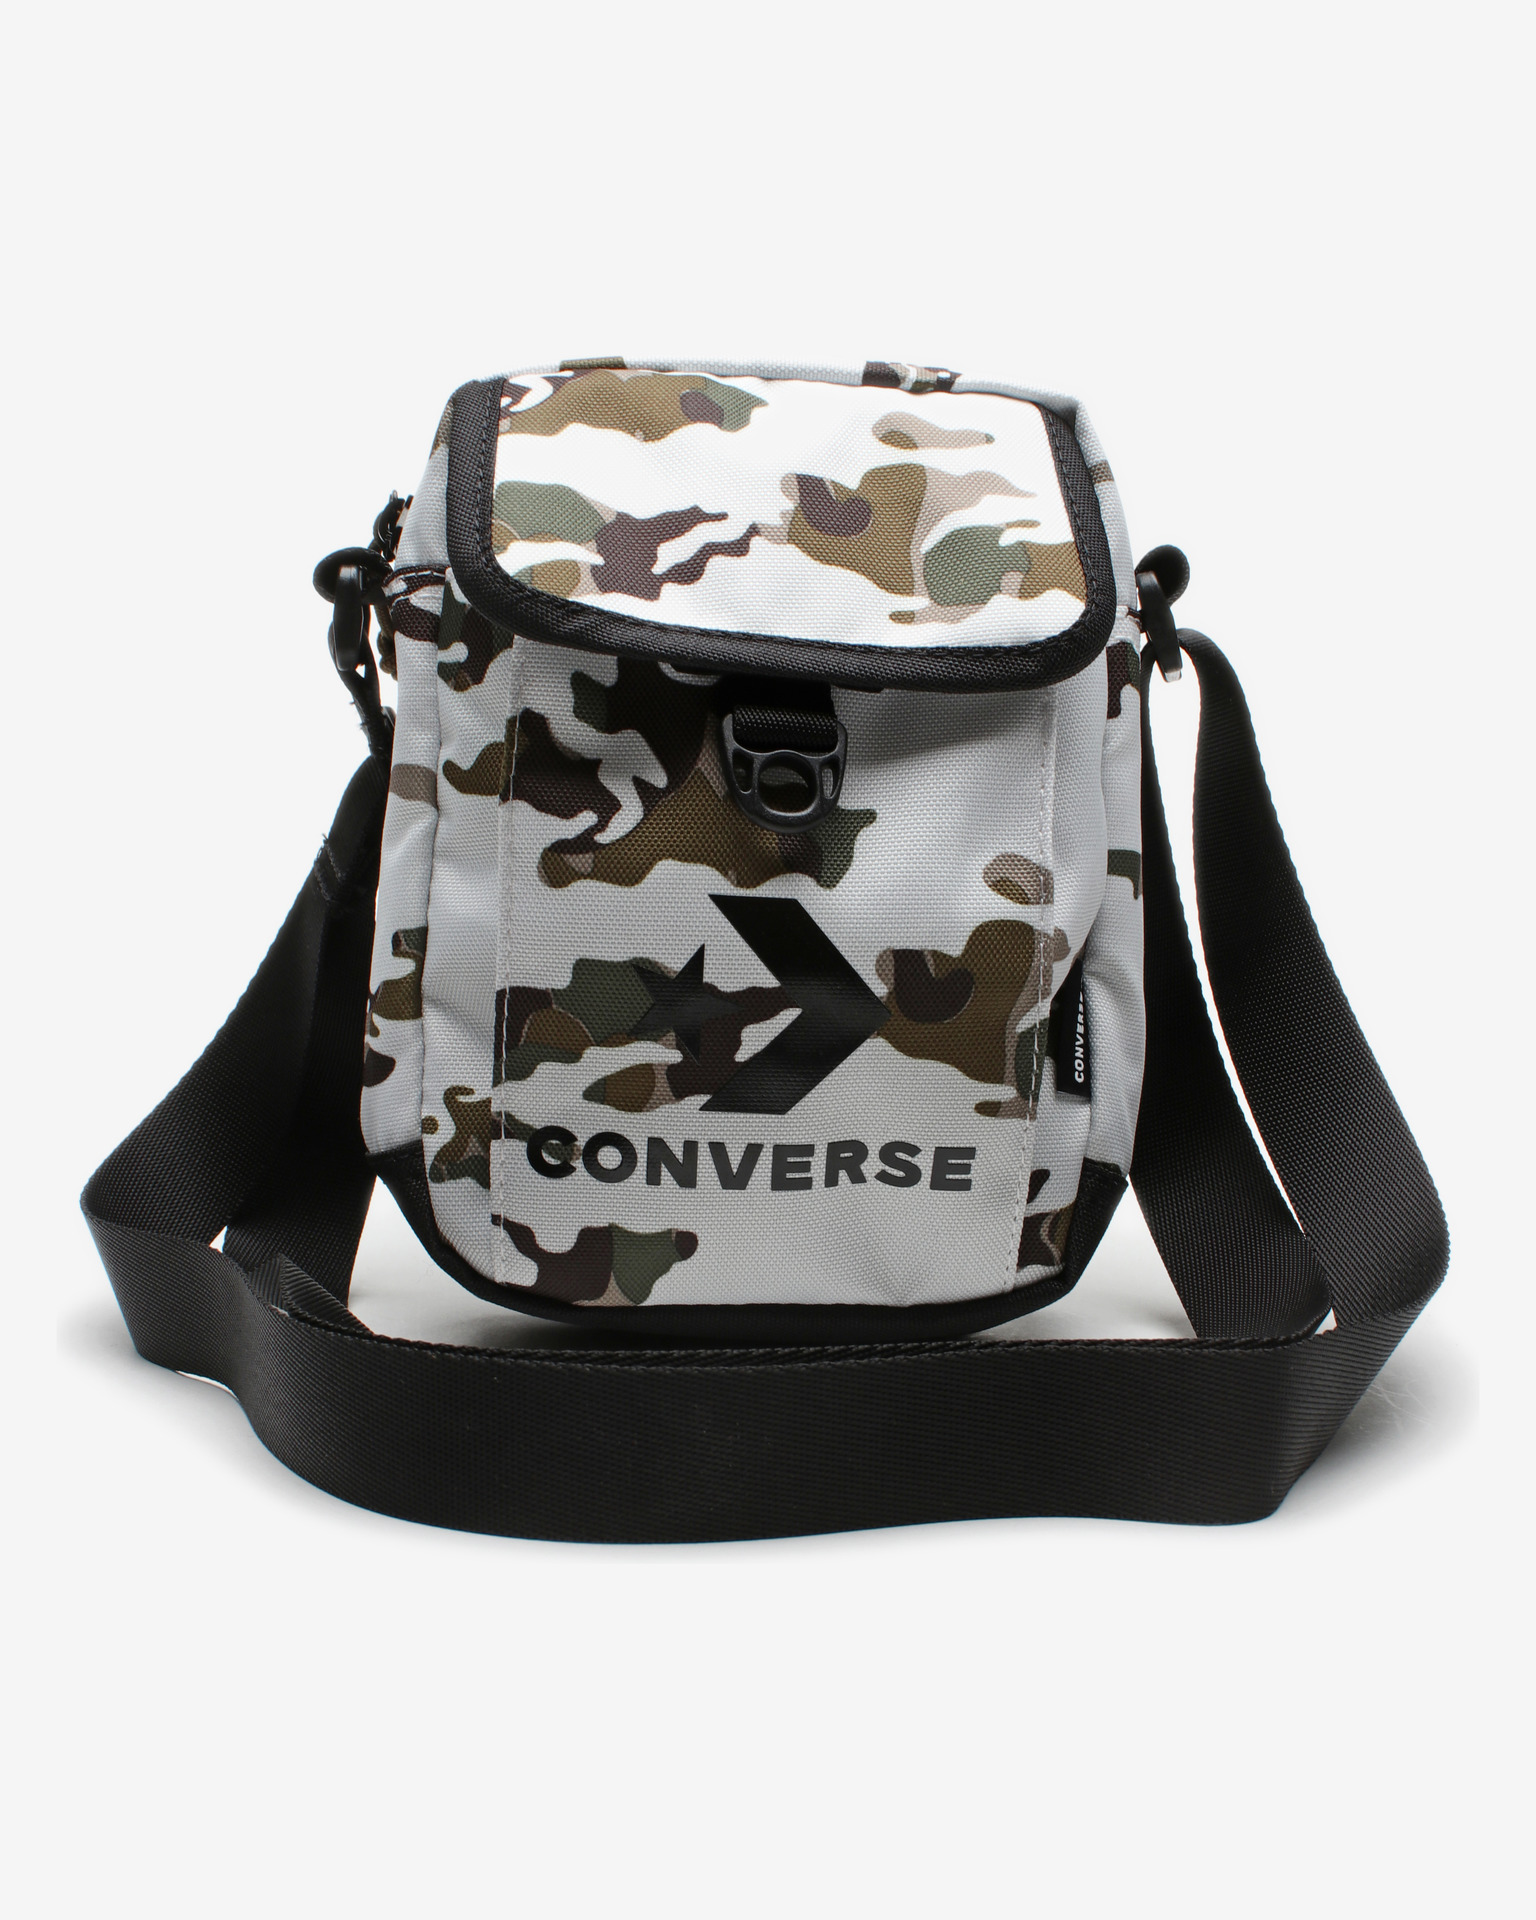 Converse Comms Pouch 2.0 crossbody bag in black